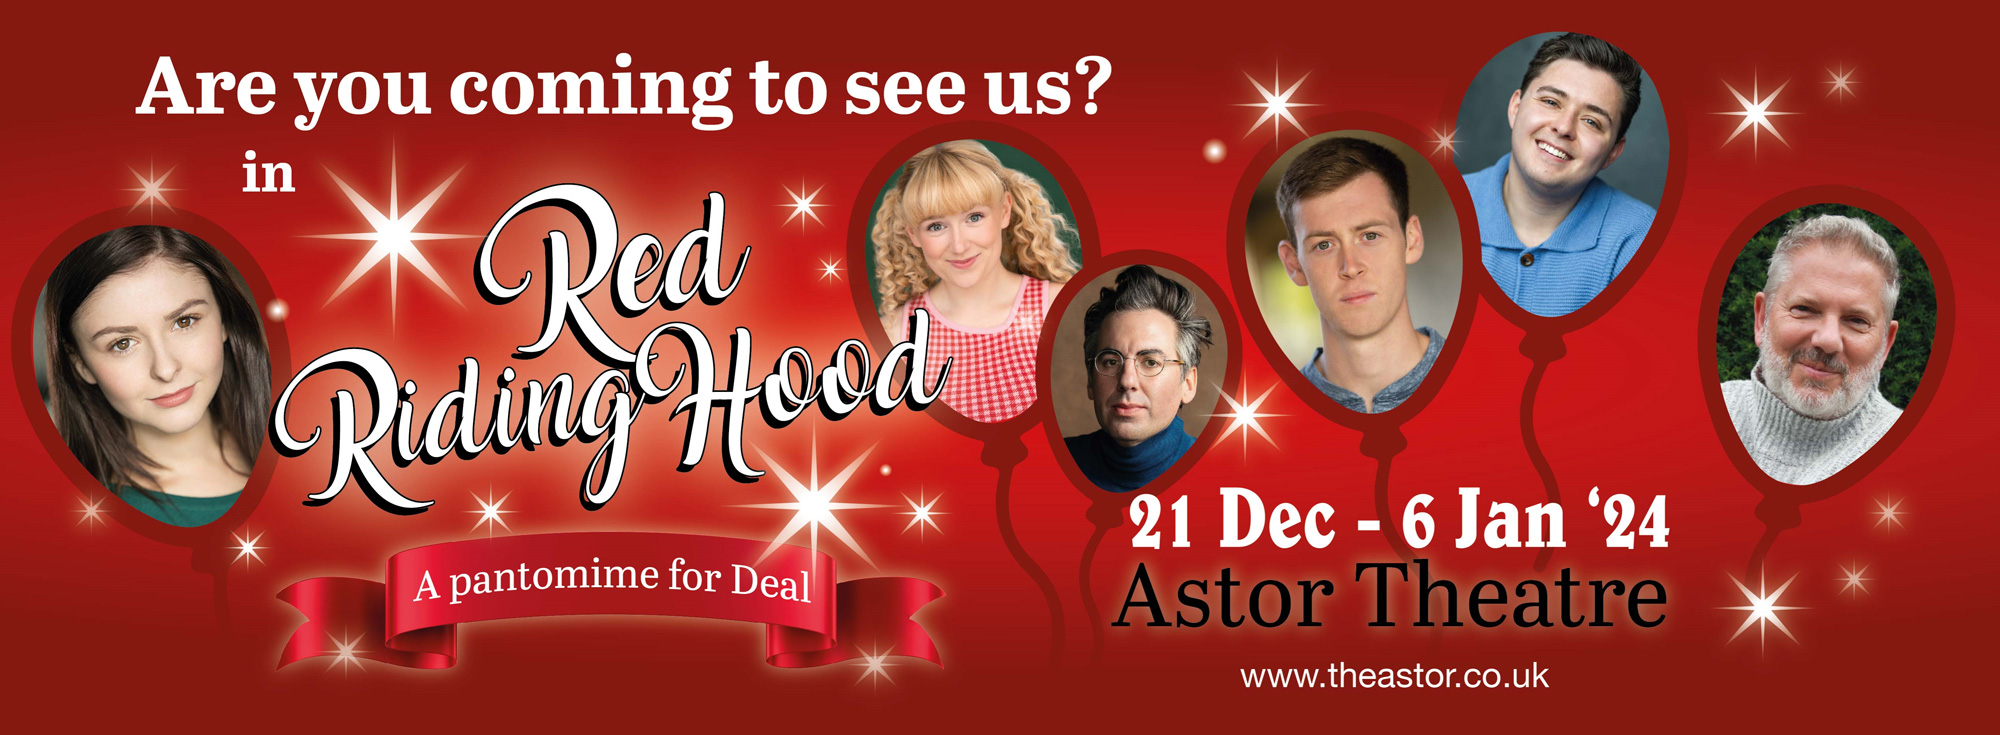 Red Riding Hood at The Astor